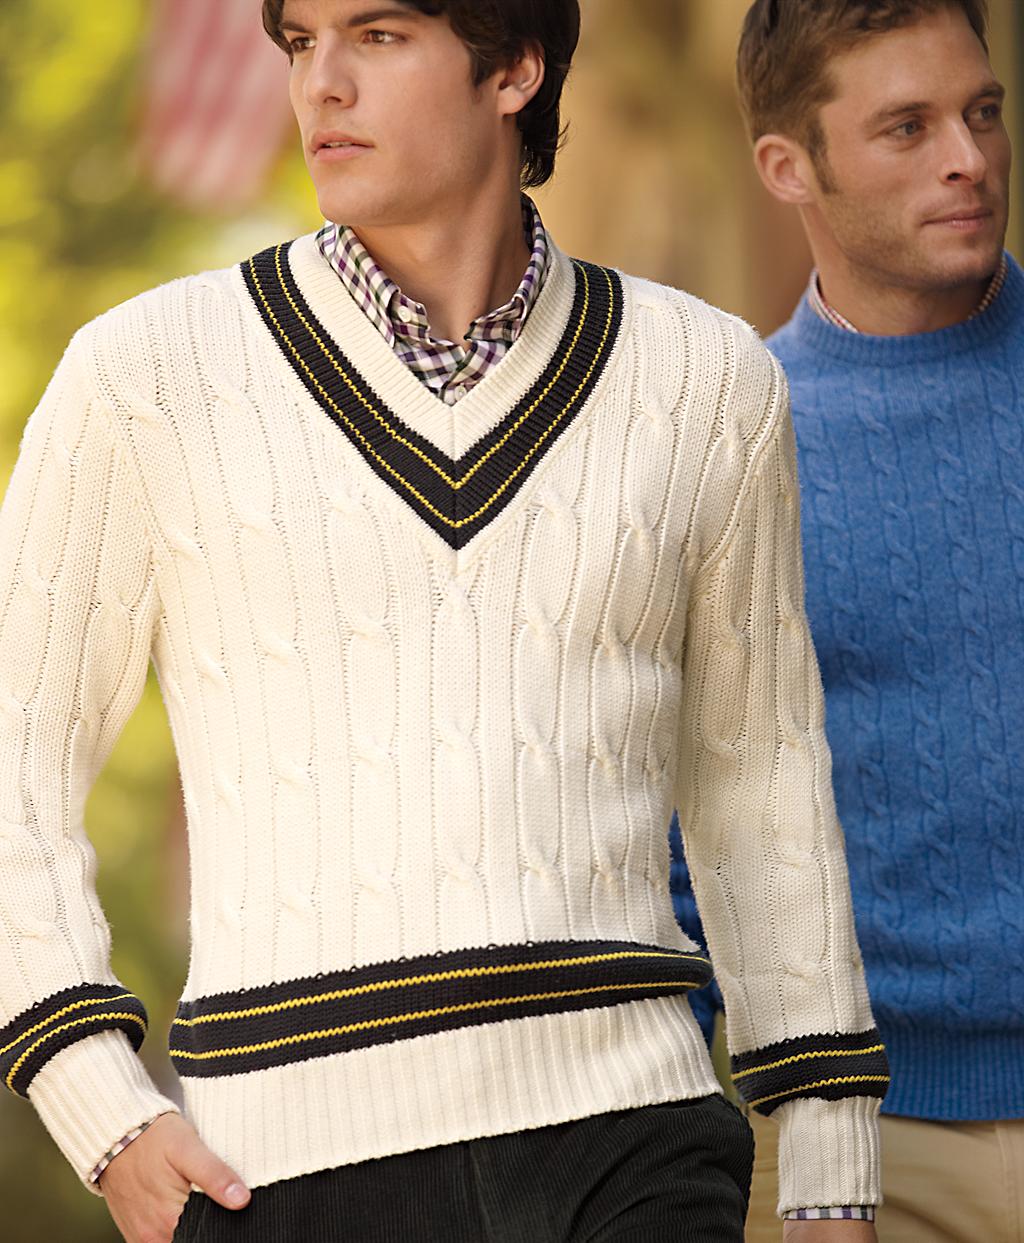 Lyst - Brooks Brothers Country Club Saxxon Cricket Sweater in Natural ...